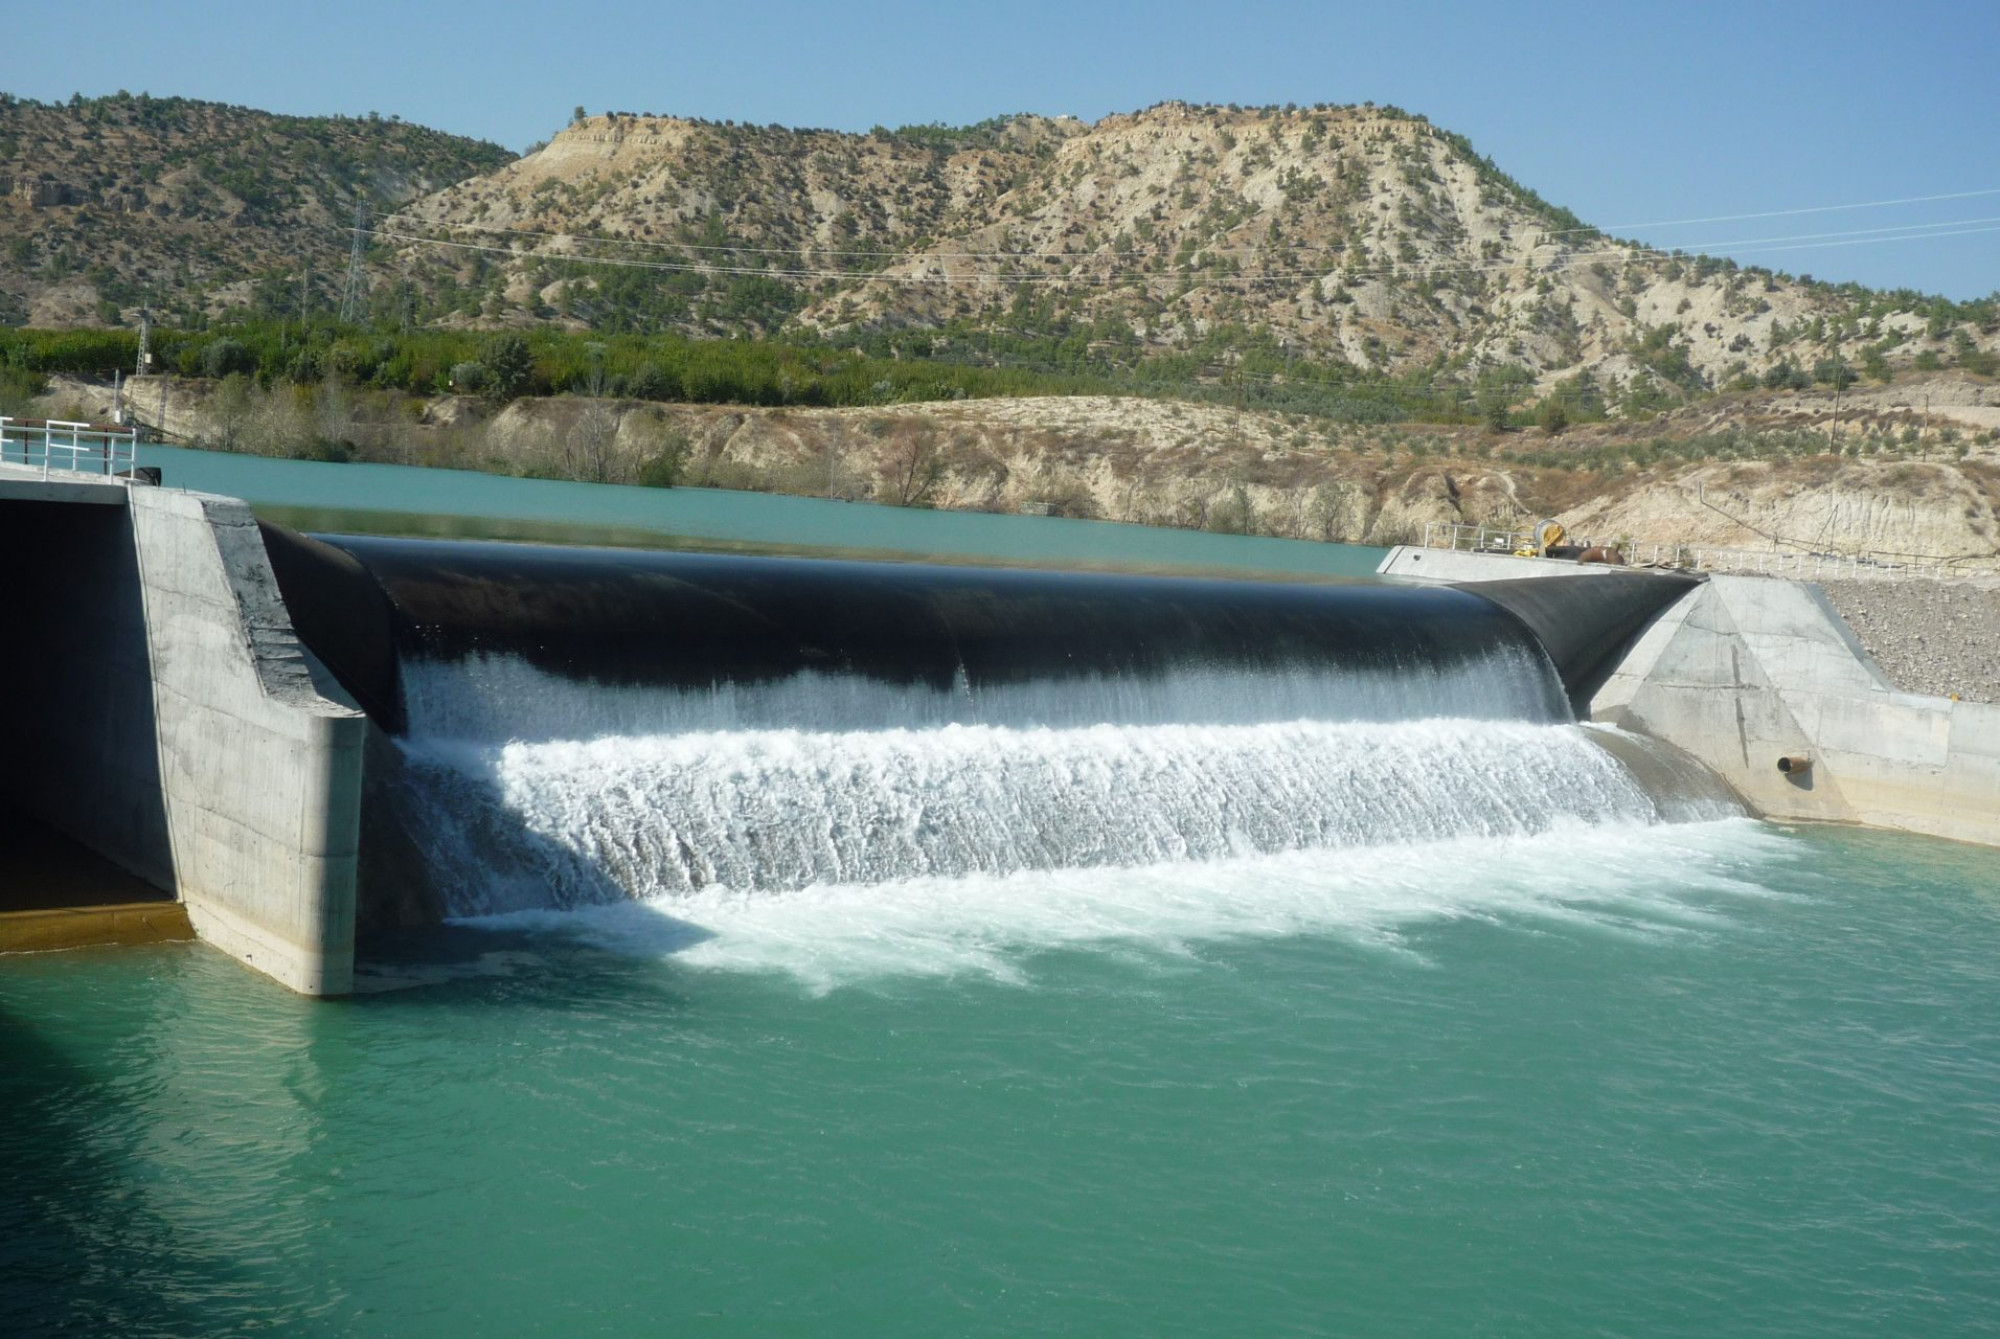 A dam with overflow being restricted through an inflatable mechanism